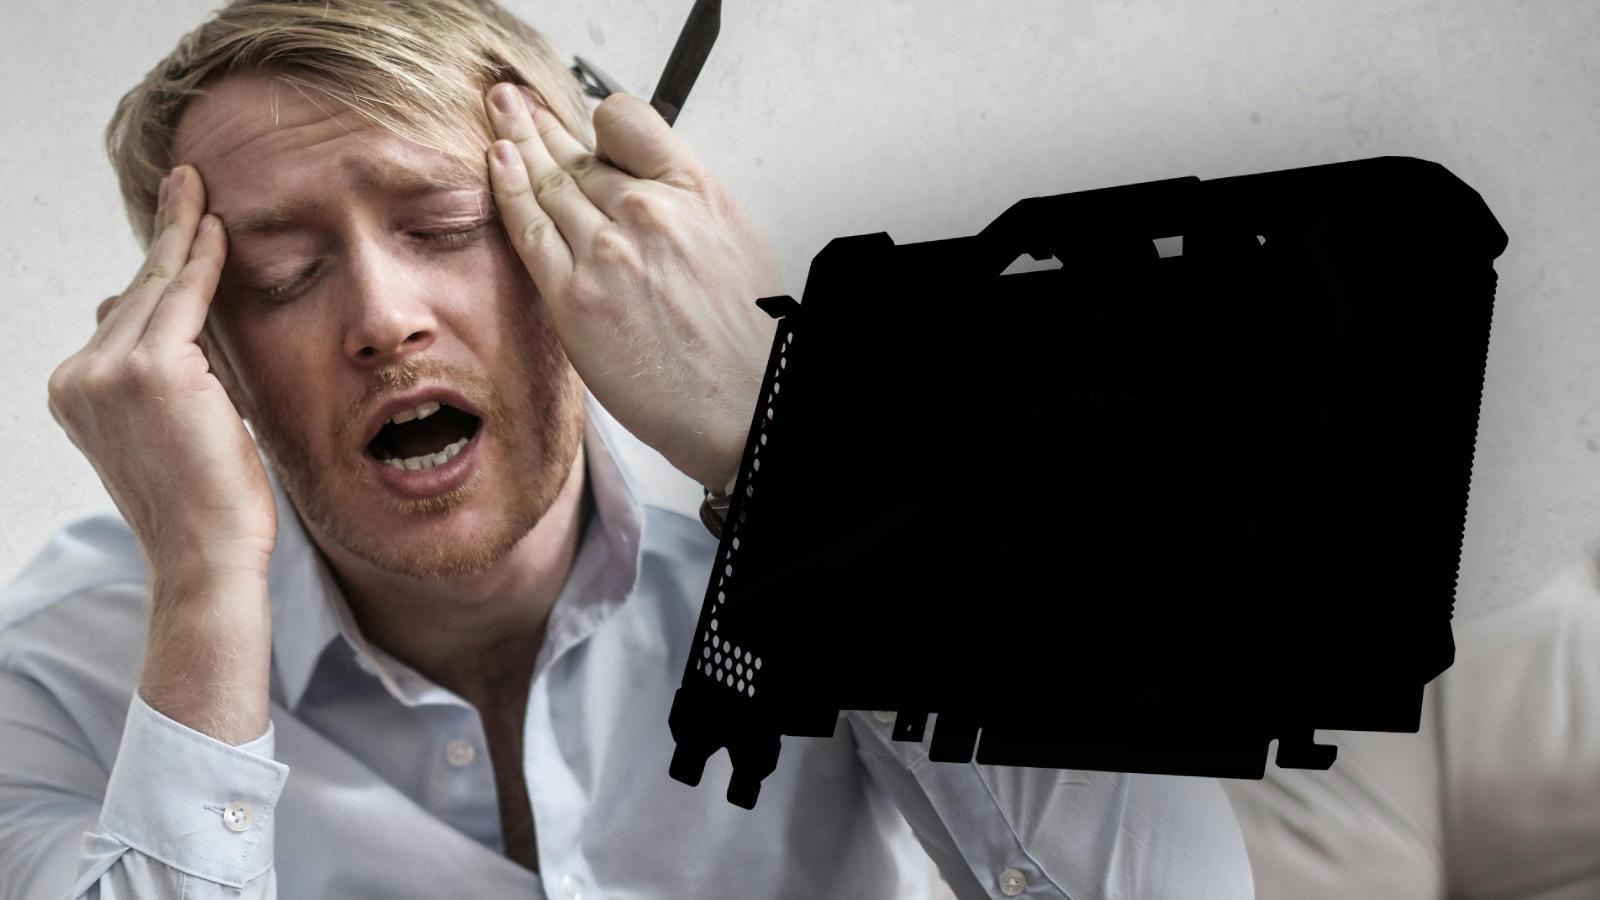 Man with head in hands next to mystery GPU